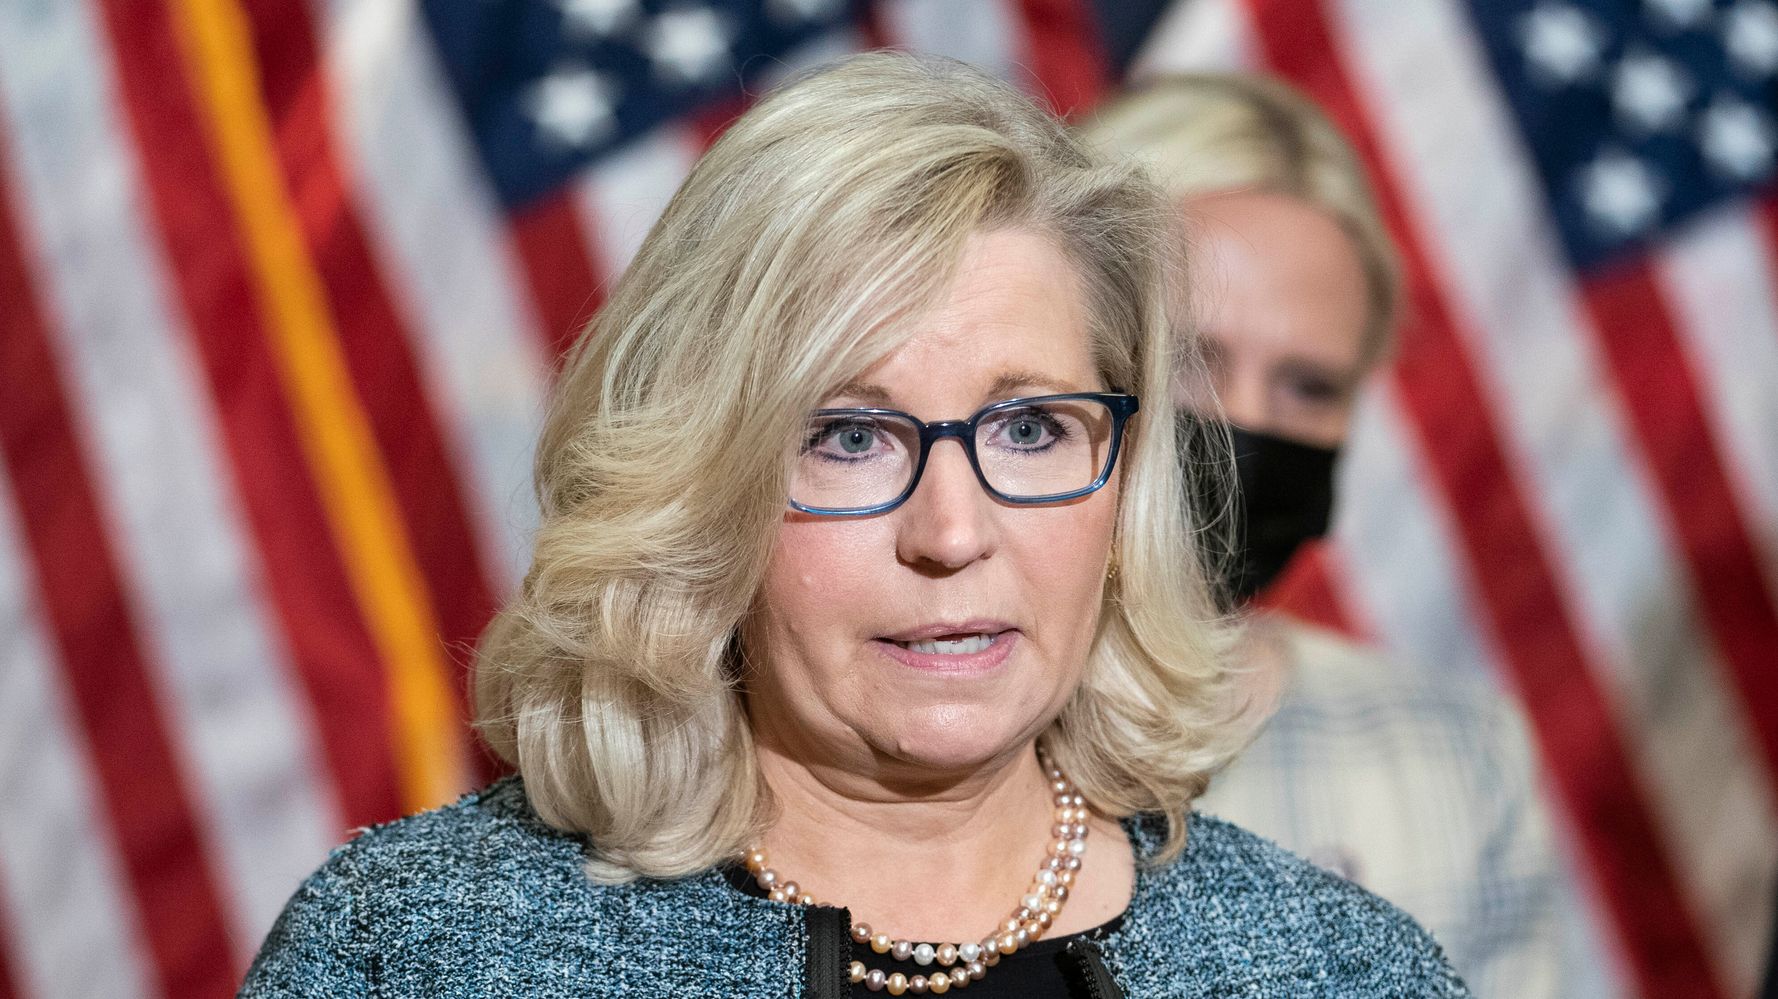 WSJ Slams GOP Effort To Oust Liz Cheney For 'Daring To Tell The Truth'